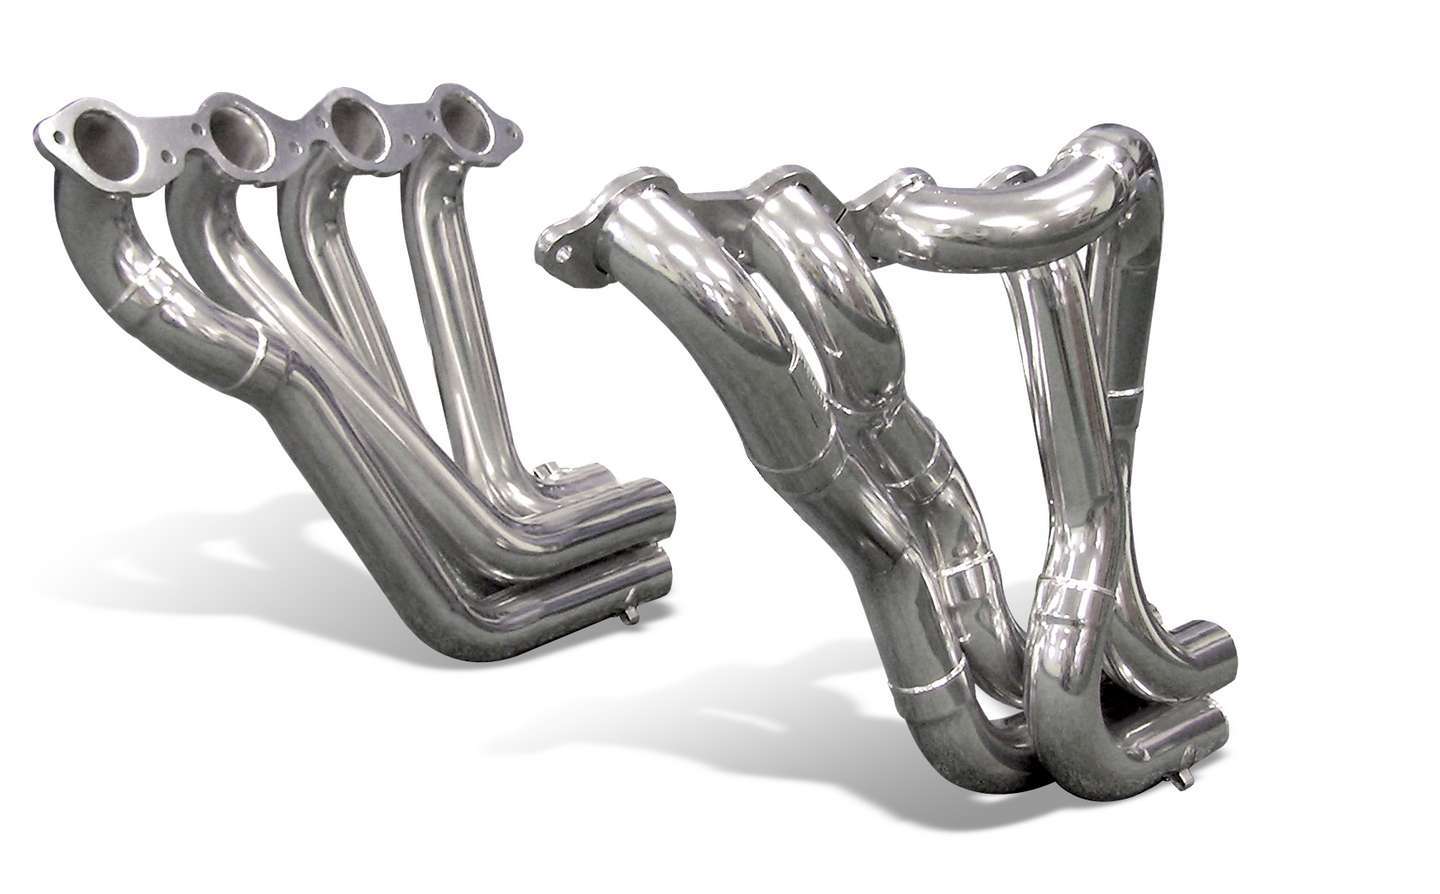 Dynatech 750-91010 Headers, 2-1/8 in Primary, Collector Required, Steel, Metallic Ceramic, Big Block Chevy, GM F-Body / X-Body 1967-74, Pair